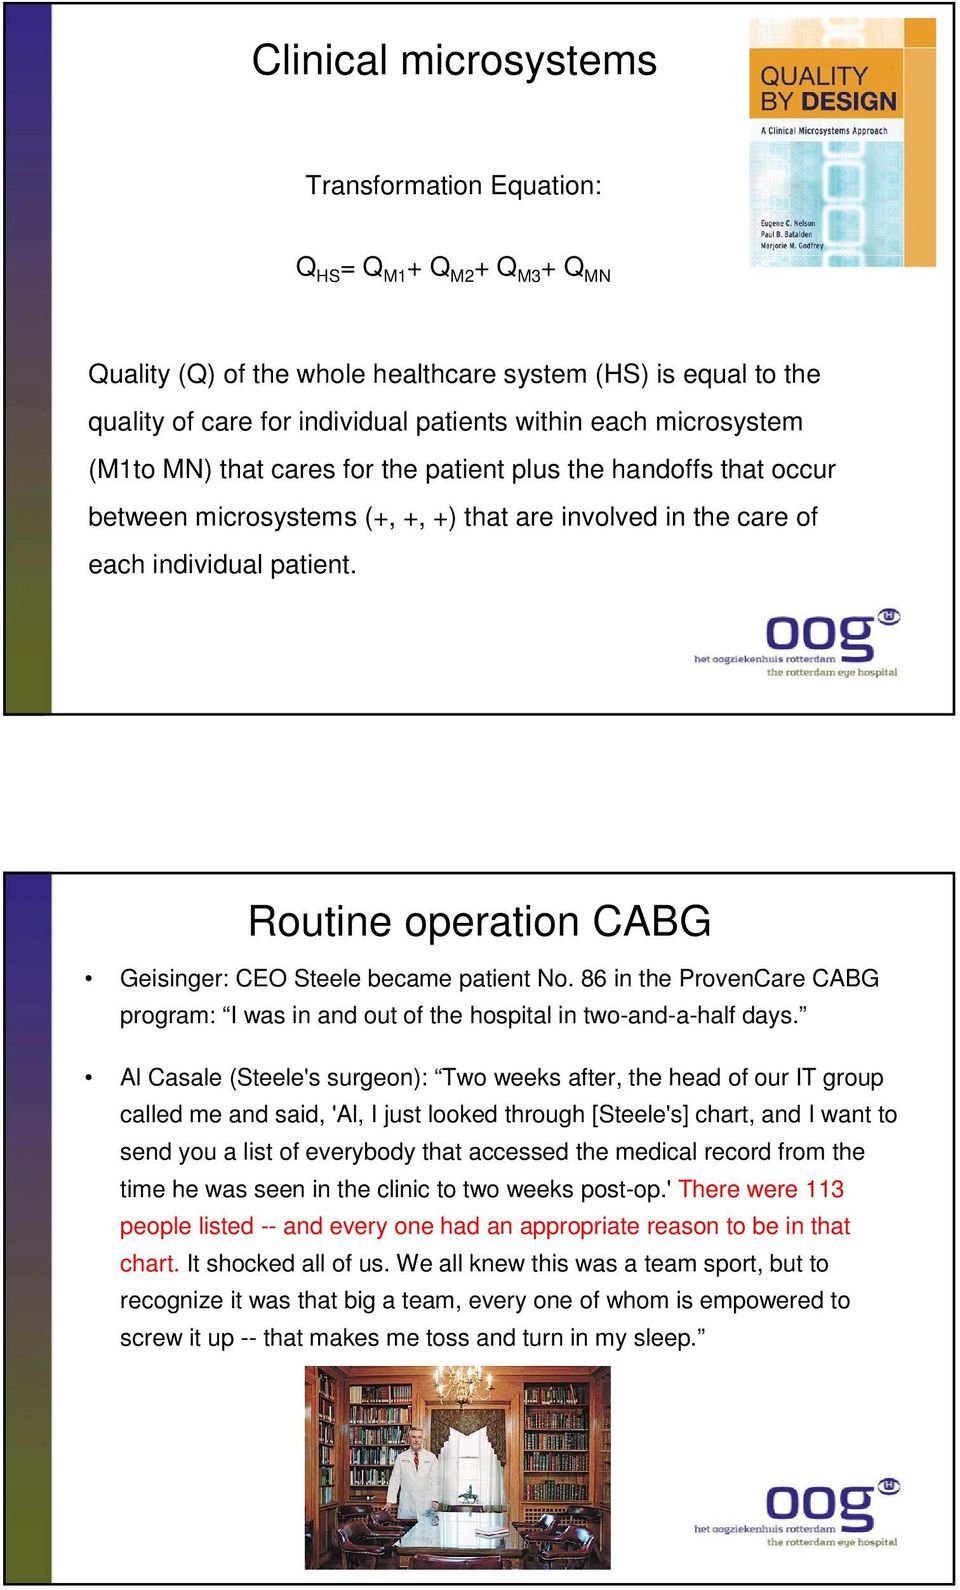 Routine operation CABG Geisinger: CEO Steele became patient No. 86 in the ProvenCare CABG program: I was in and out of the hospital in two-and-a-half days.